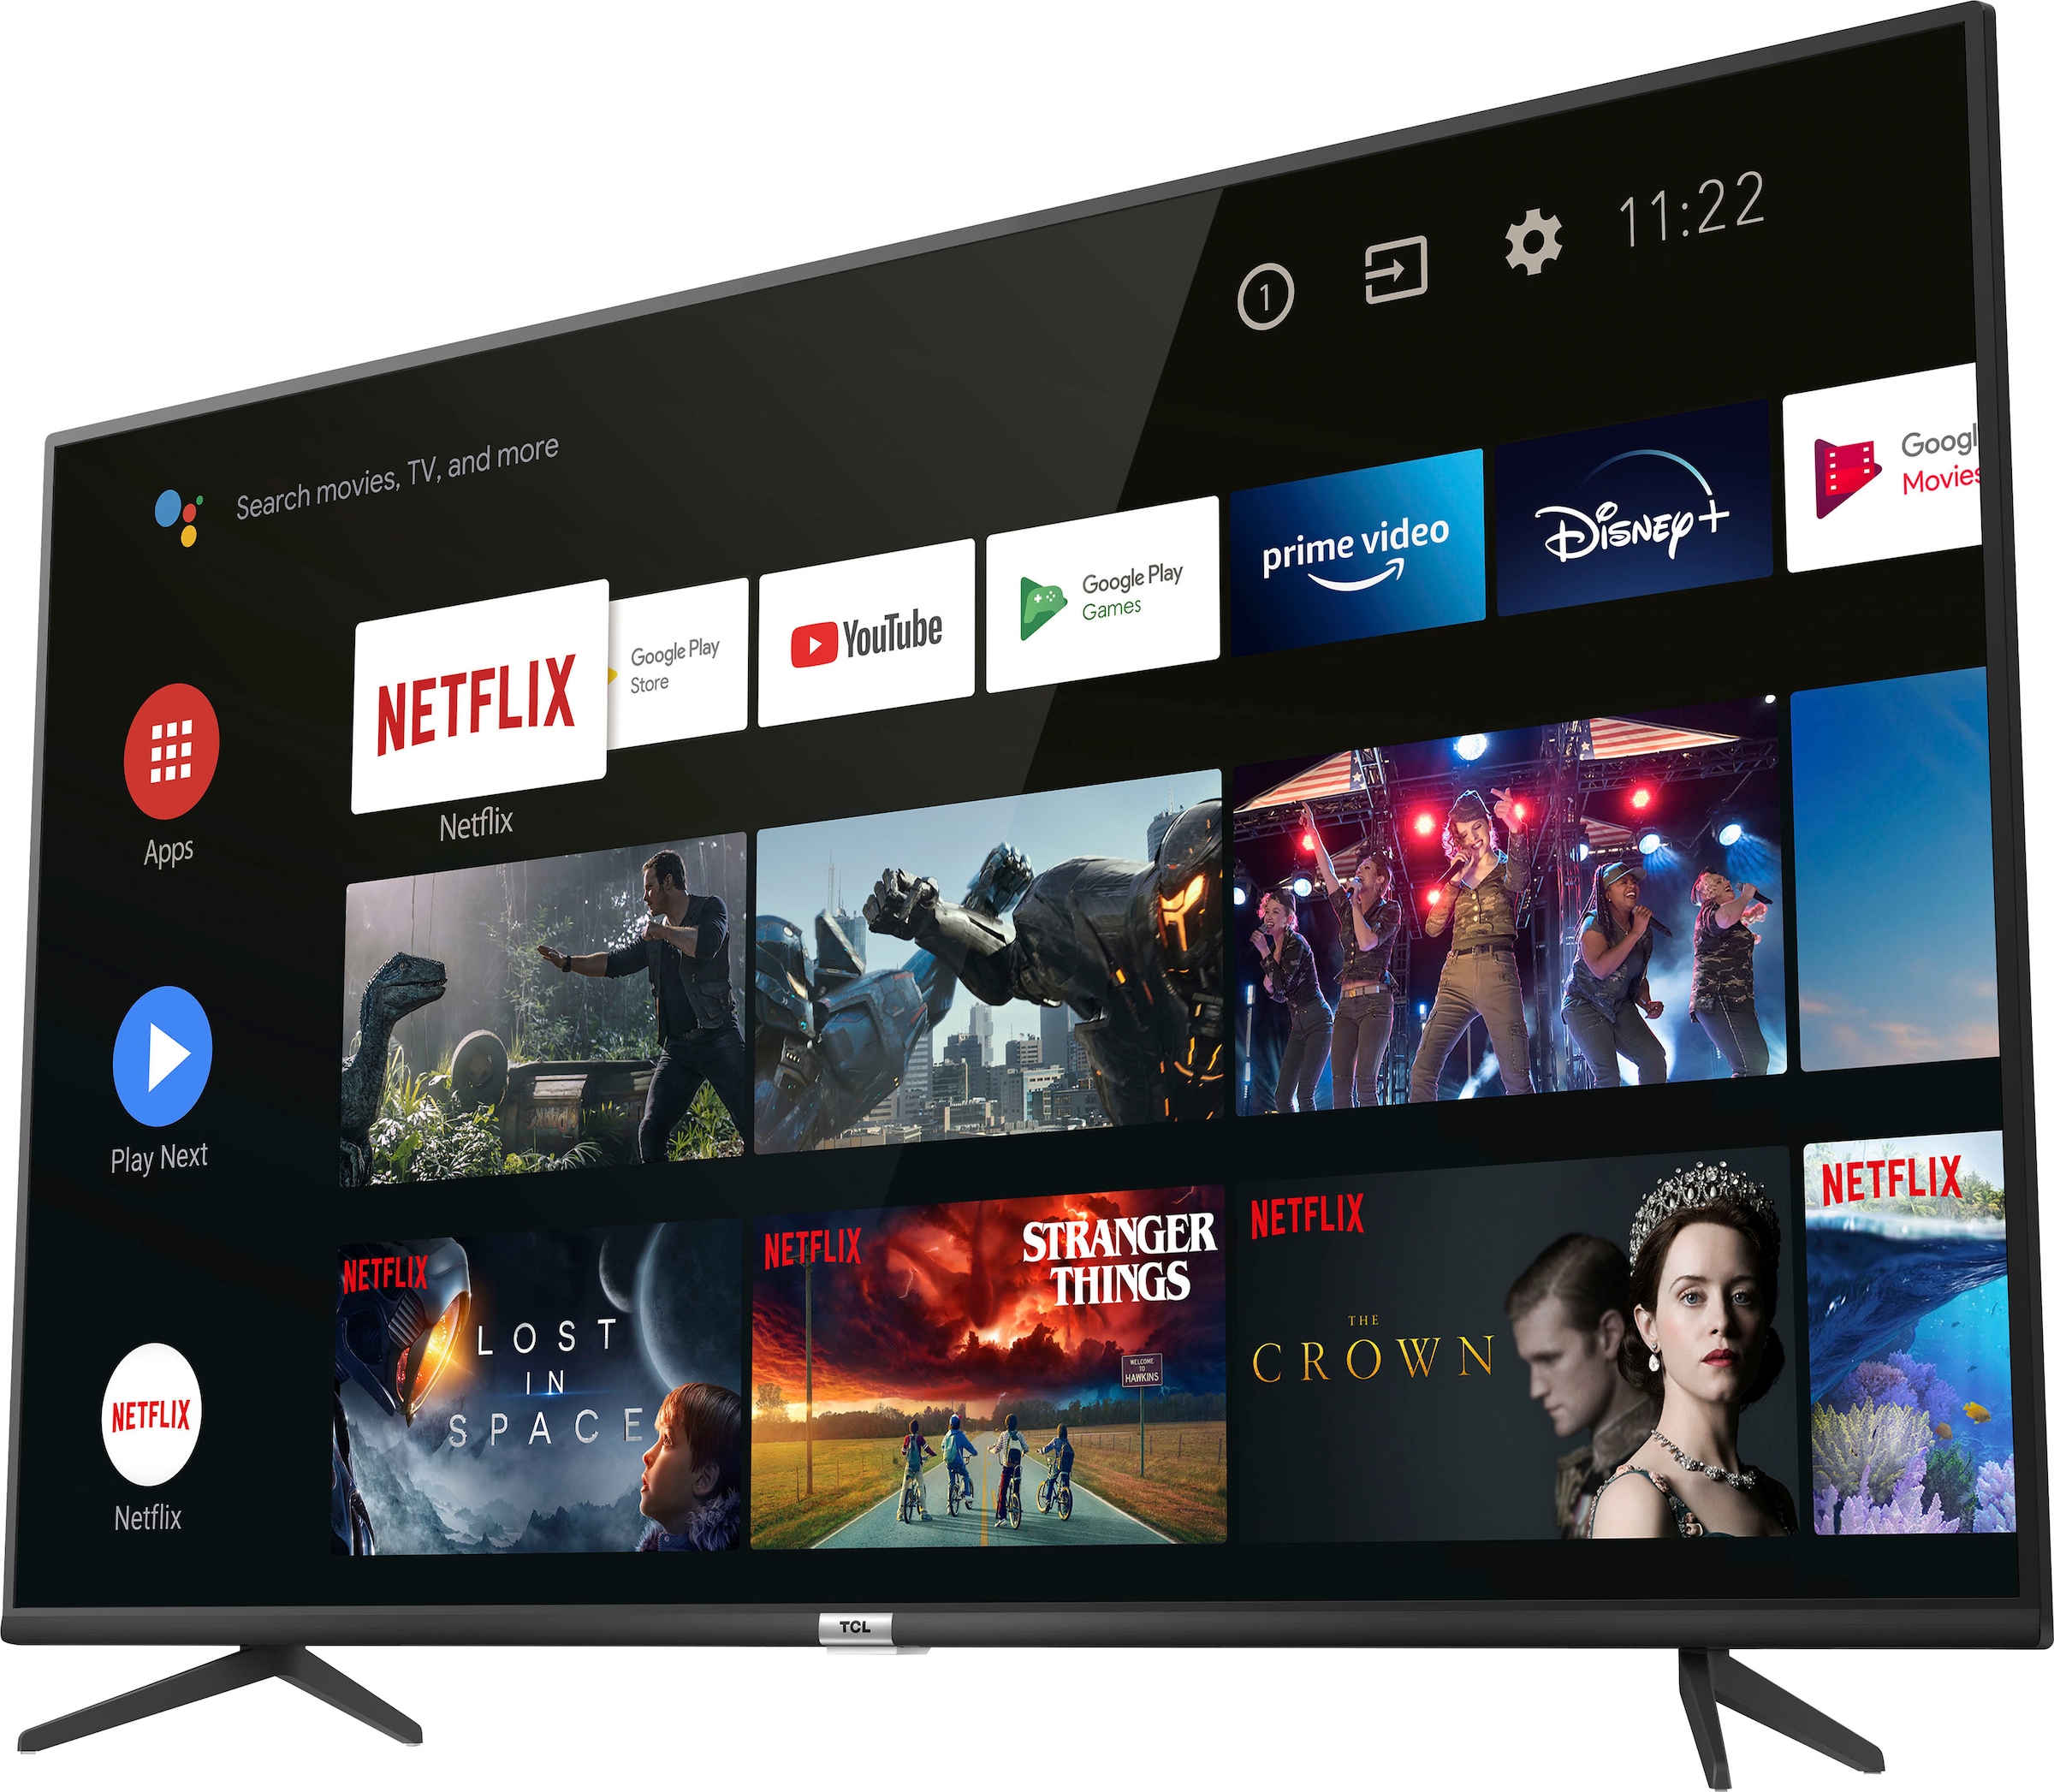 TCL LED-Fernseher »43P616X2«, 108 cm/43 Zoll, 4K Ultra HD, Android TV, Android 9.0 Betriebssystem